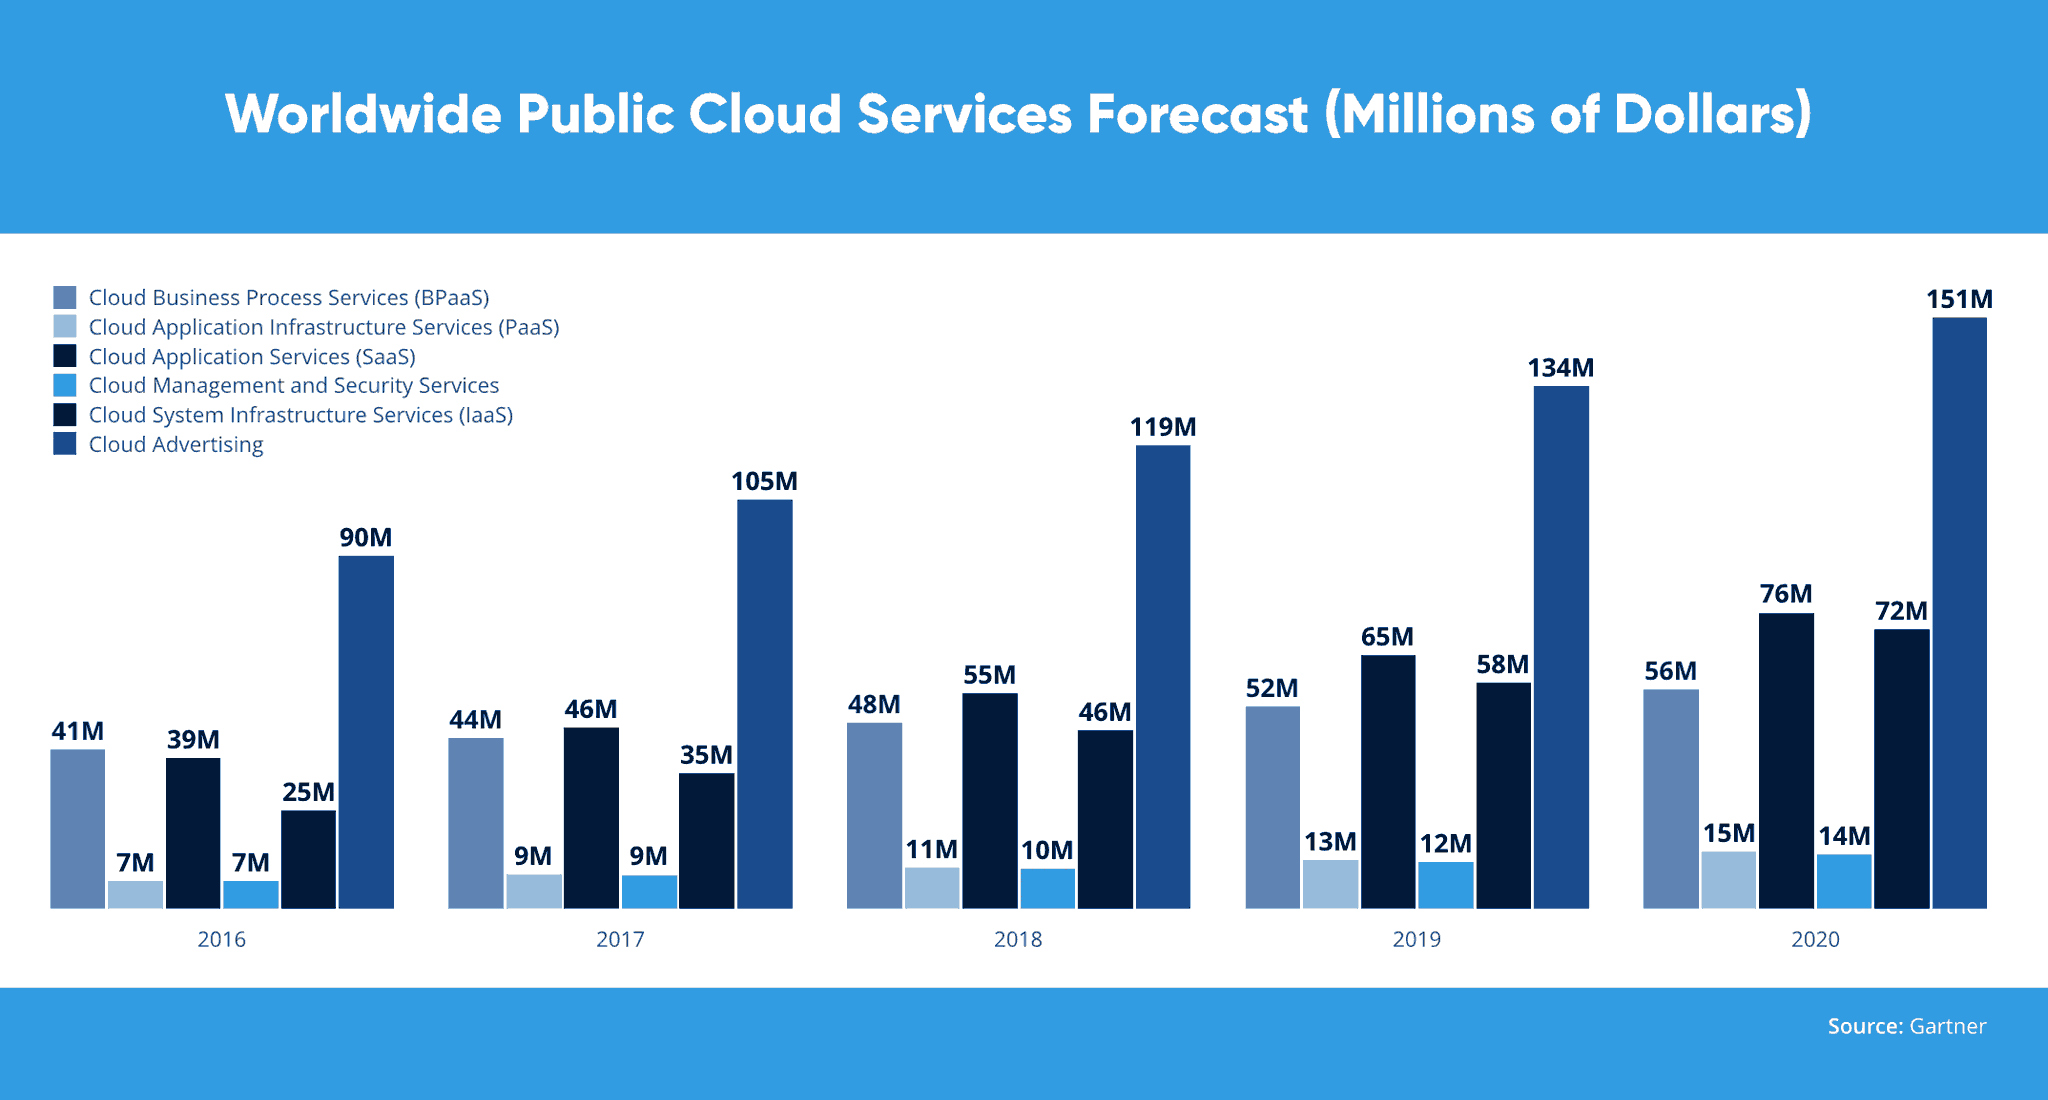 Worldwide Public Cloud Services Forecast (Millions of Dollars)